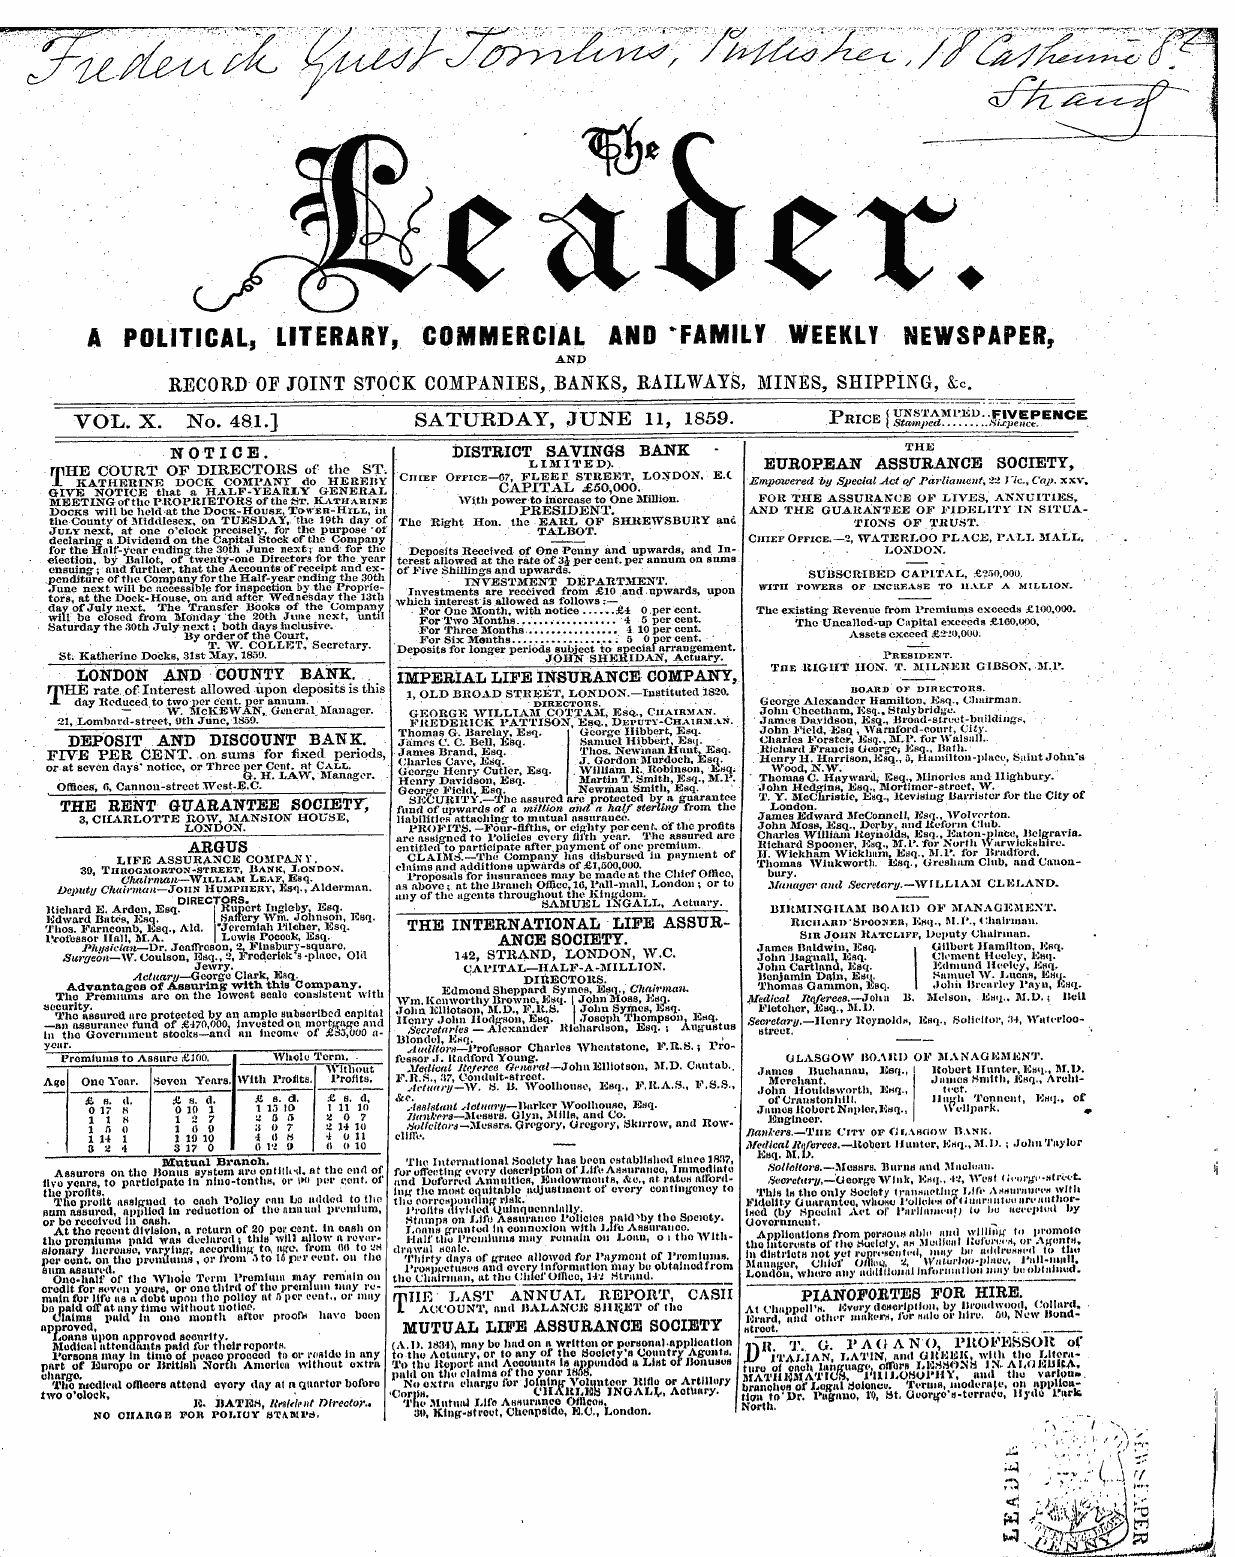 Leader (1850-1860): jS F Y, 2nd edition - Ad00105